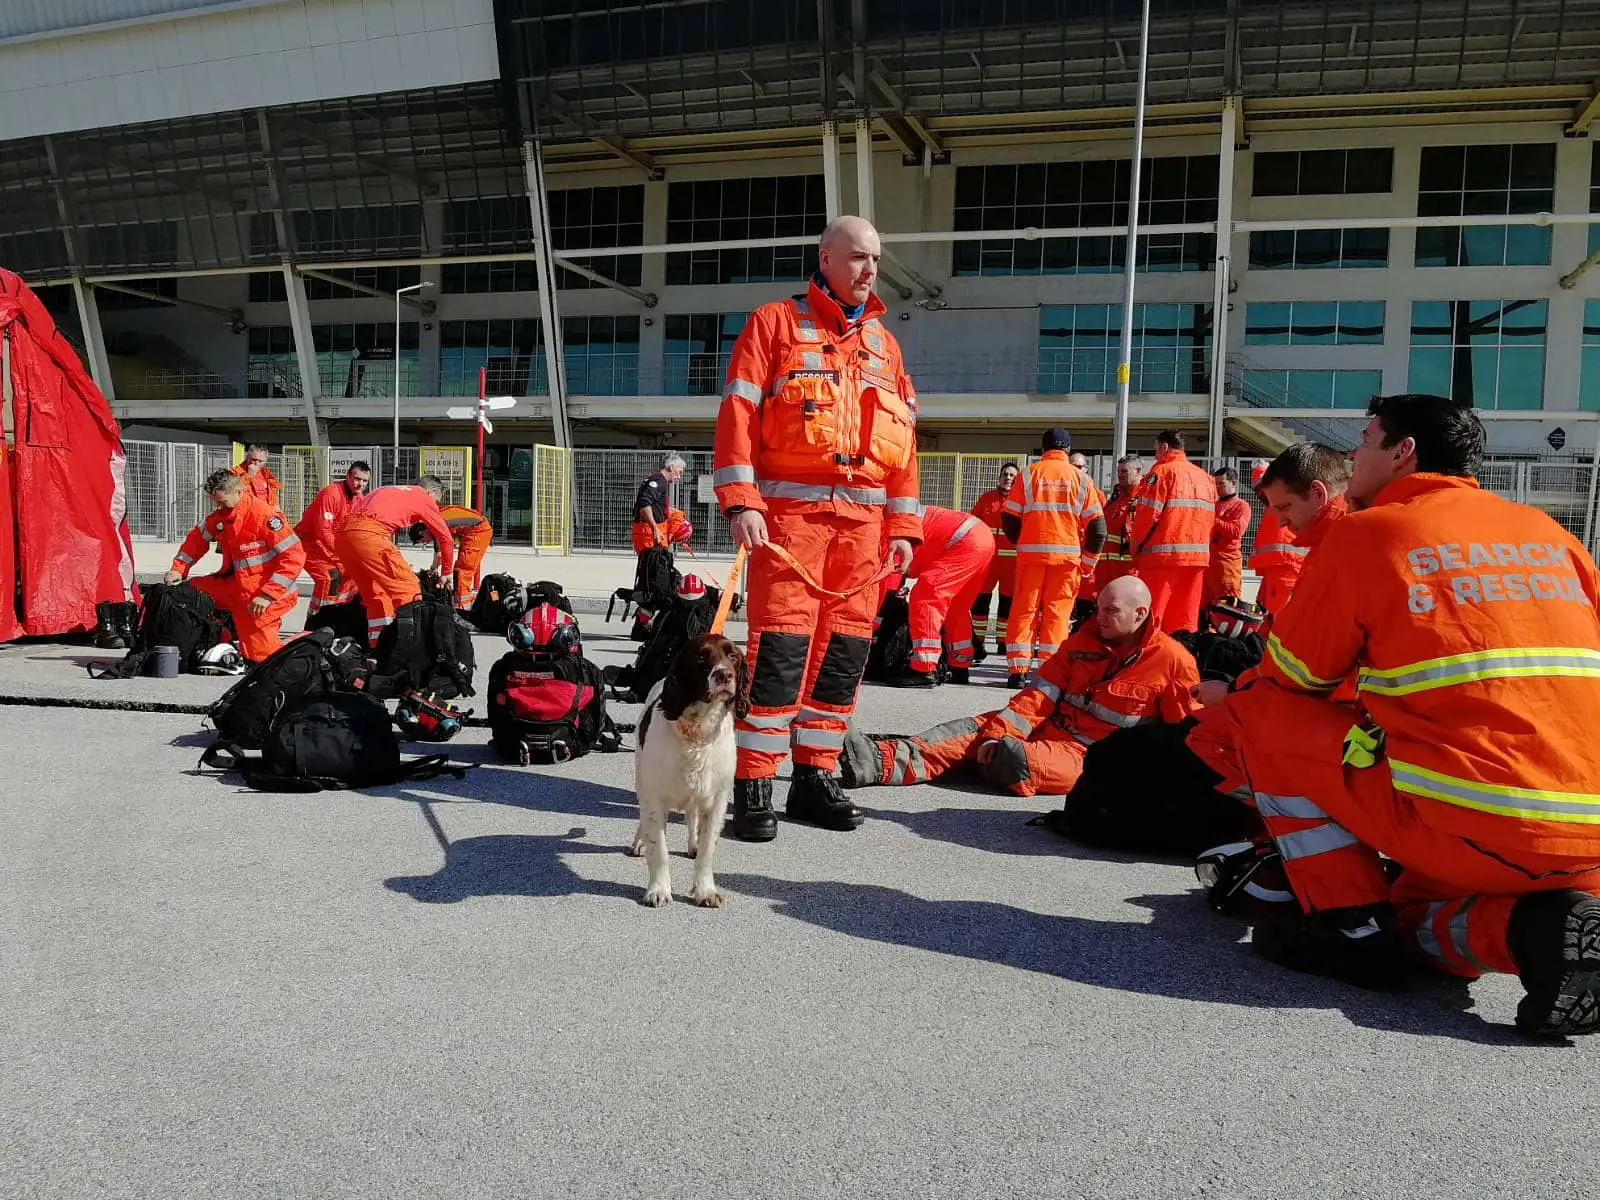 Search and rescue volunteers in Turkey